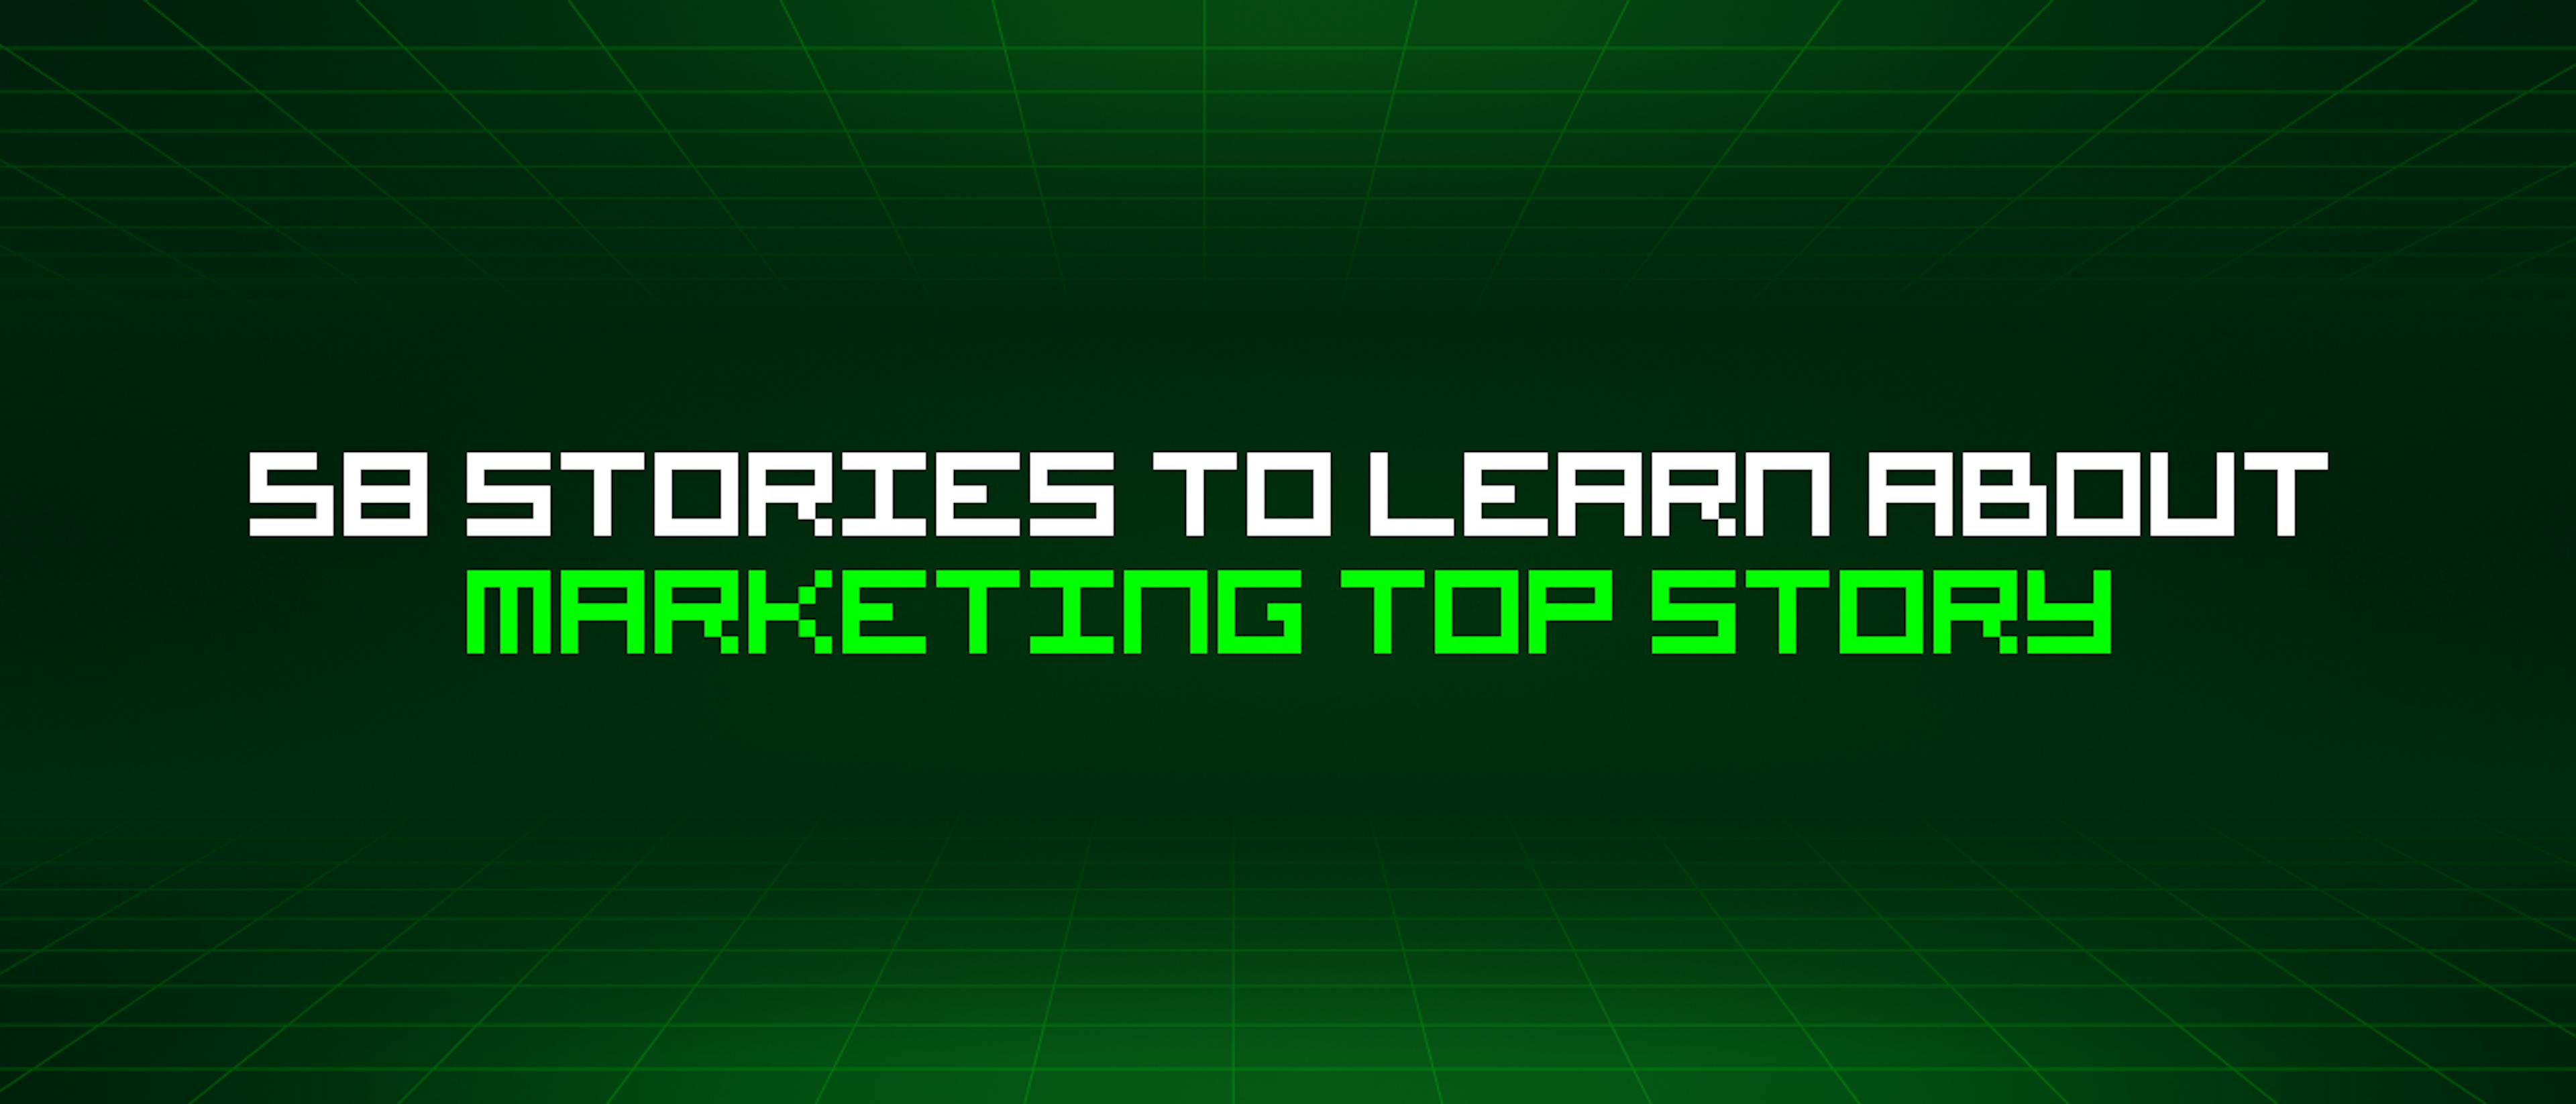 featured image - 58 Stories To Learn About Marketing Top Story